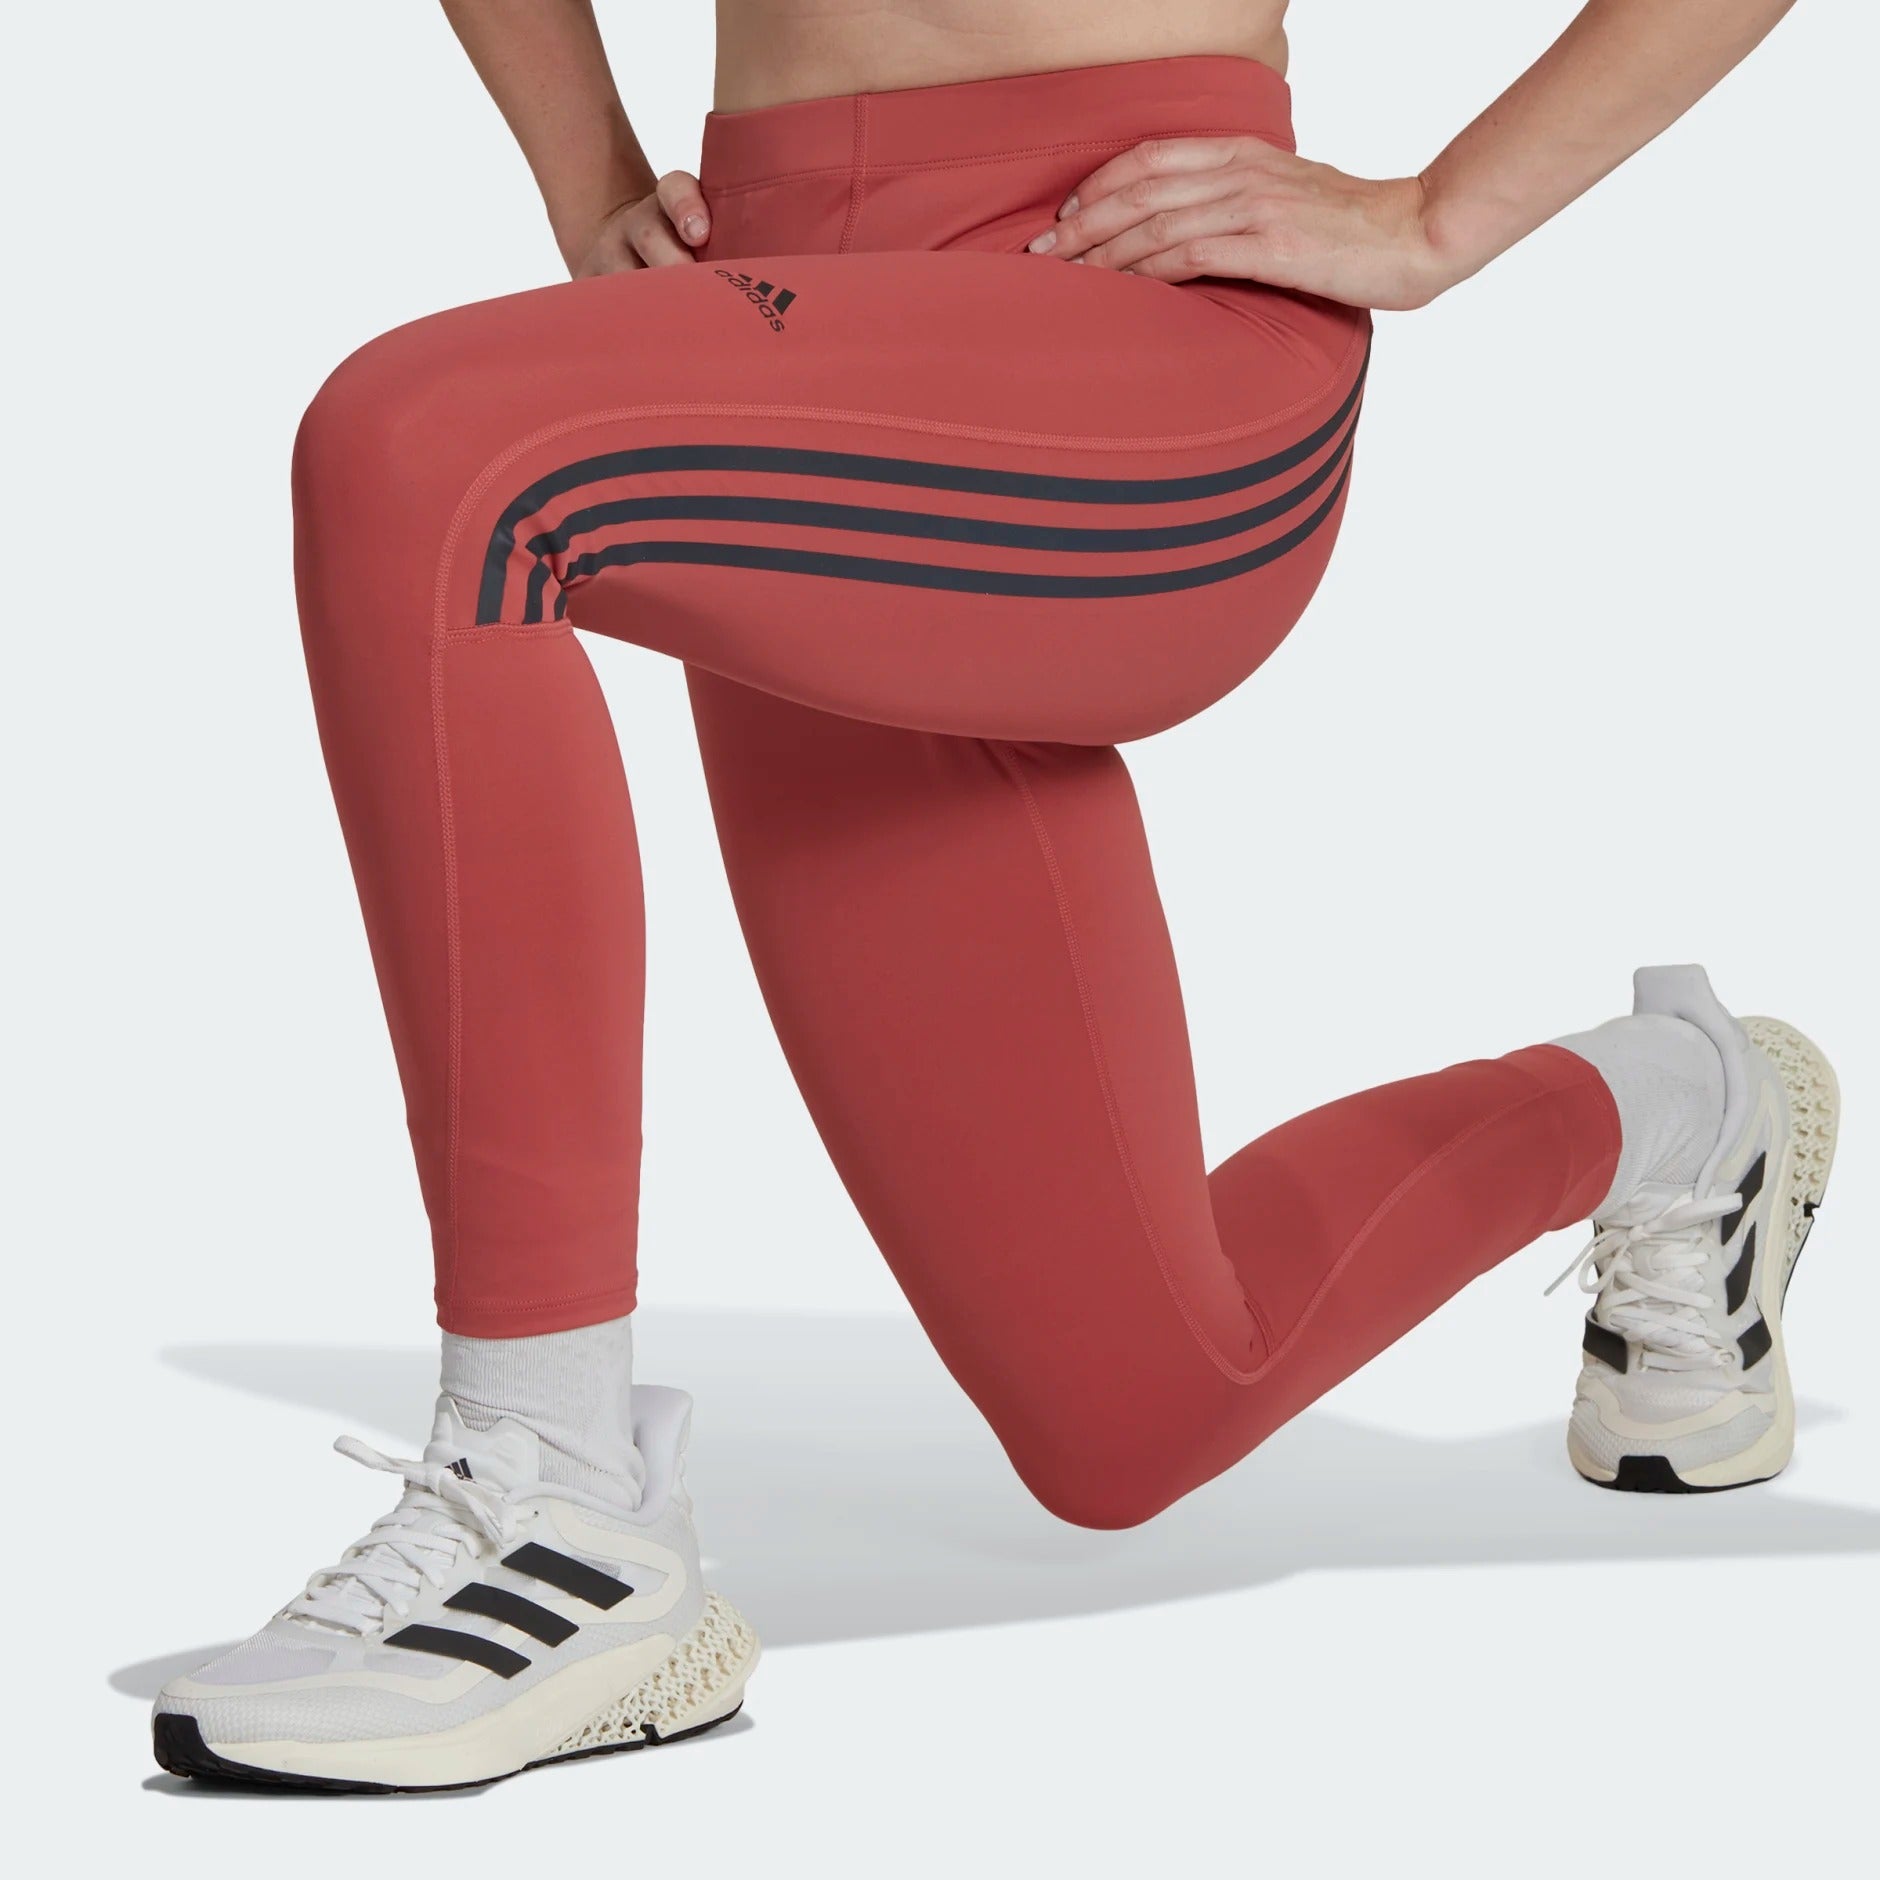 Red Adidas. | Red adidas outfit, Sporty outfits, Adidas outfit